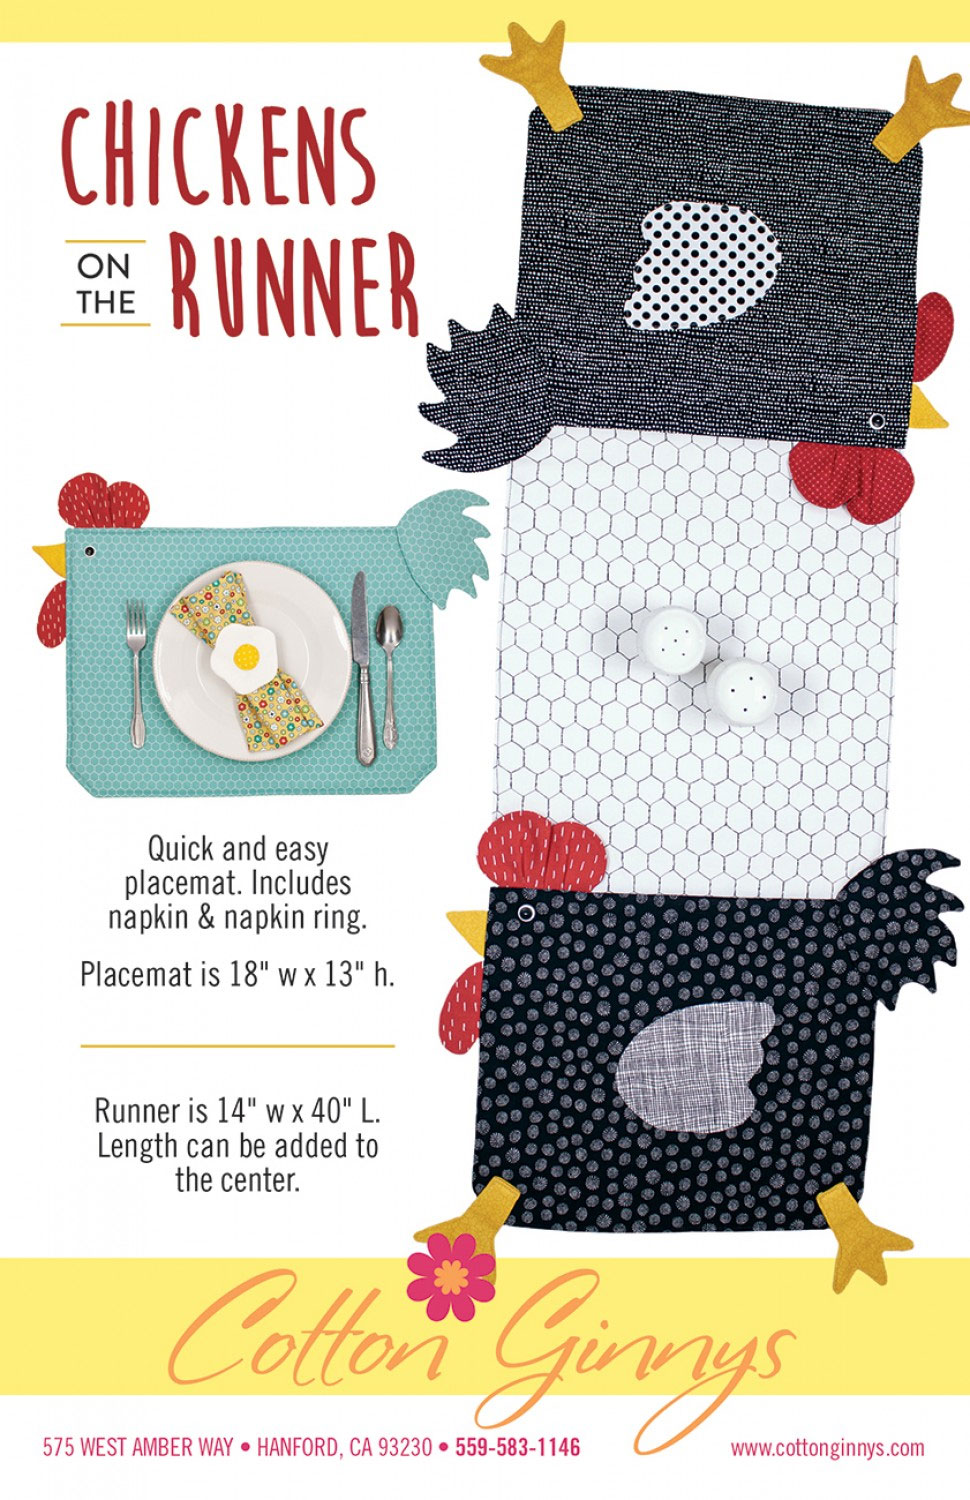 Chickens-on-the-runner-sewing-pattern-Cotton-Ginnys-front